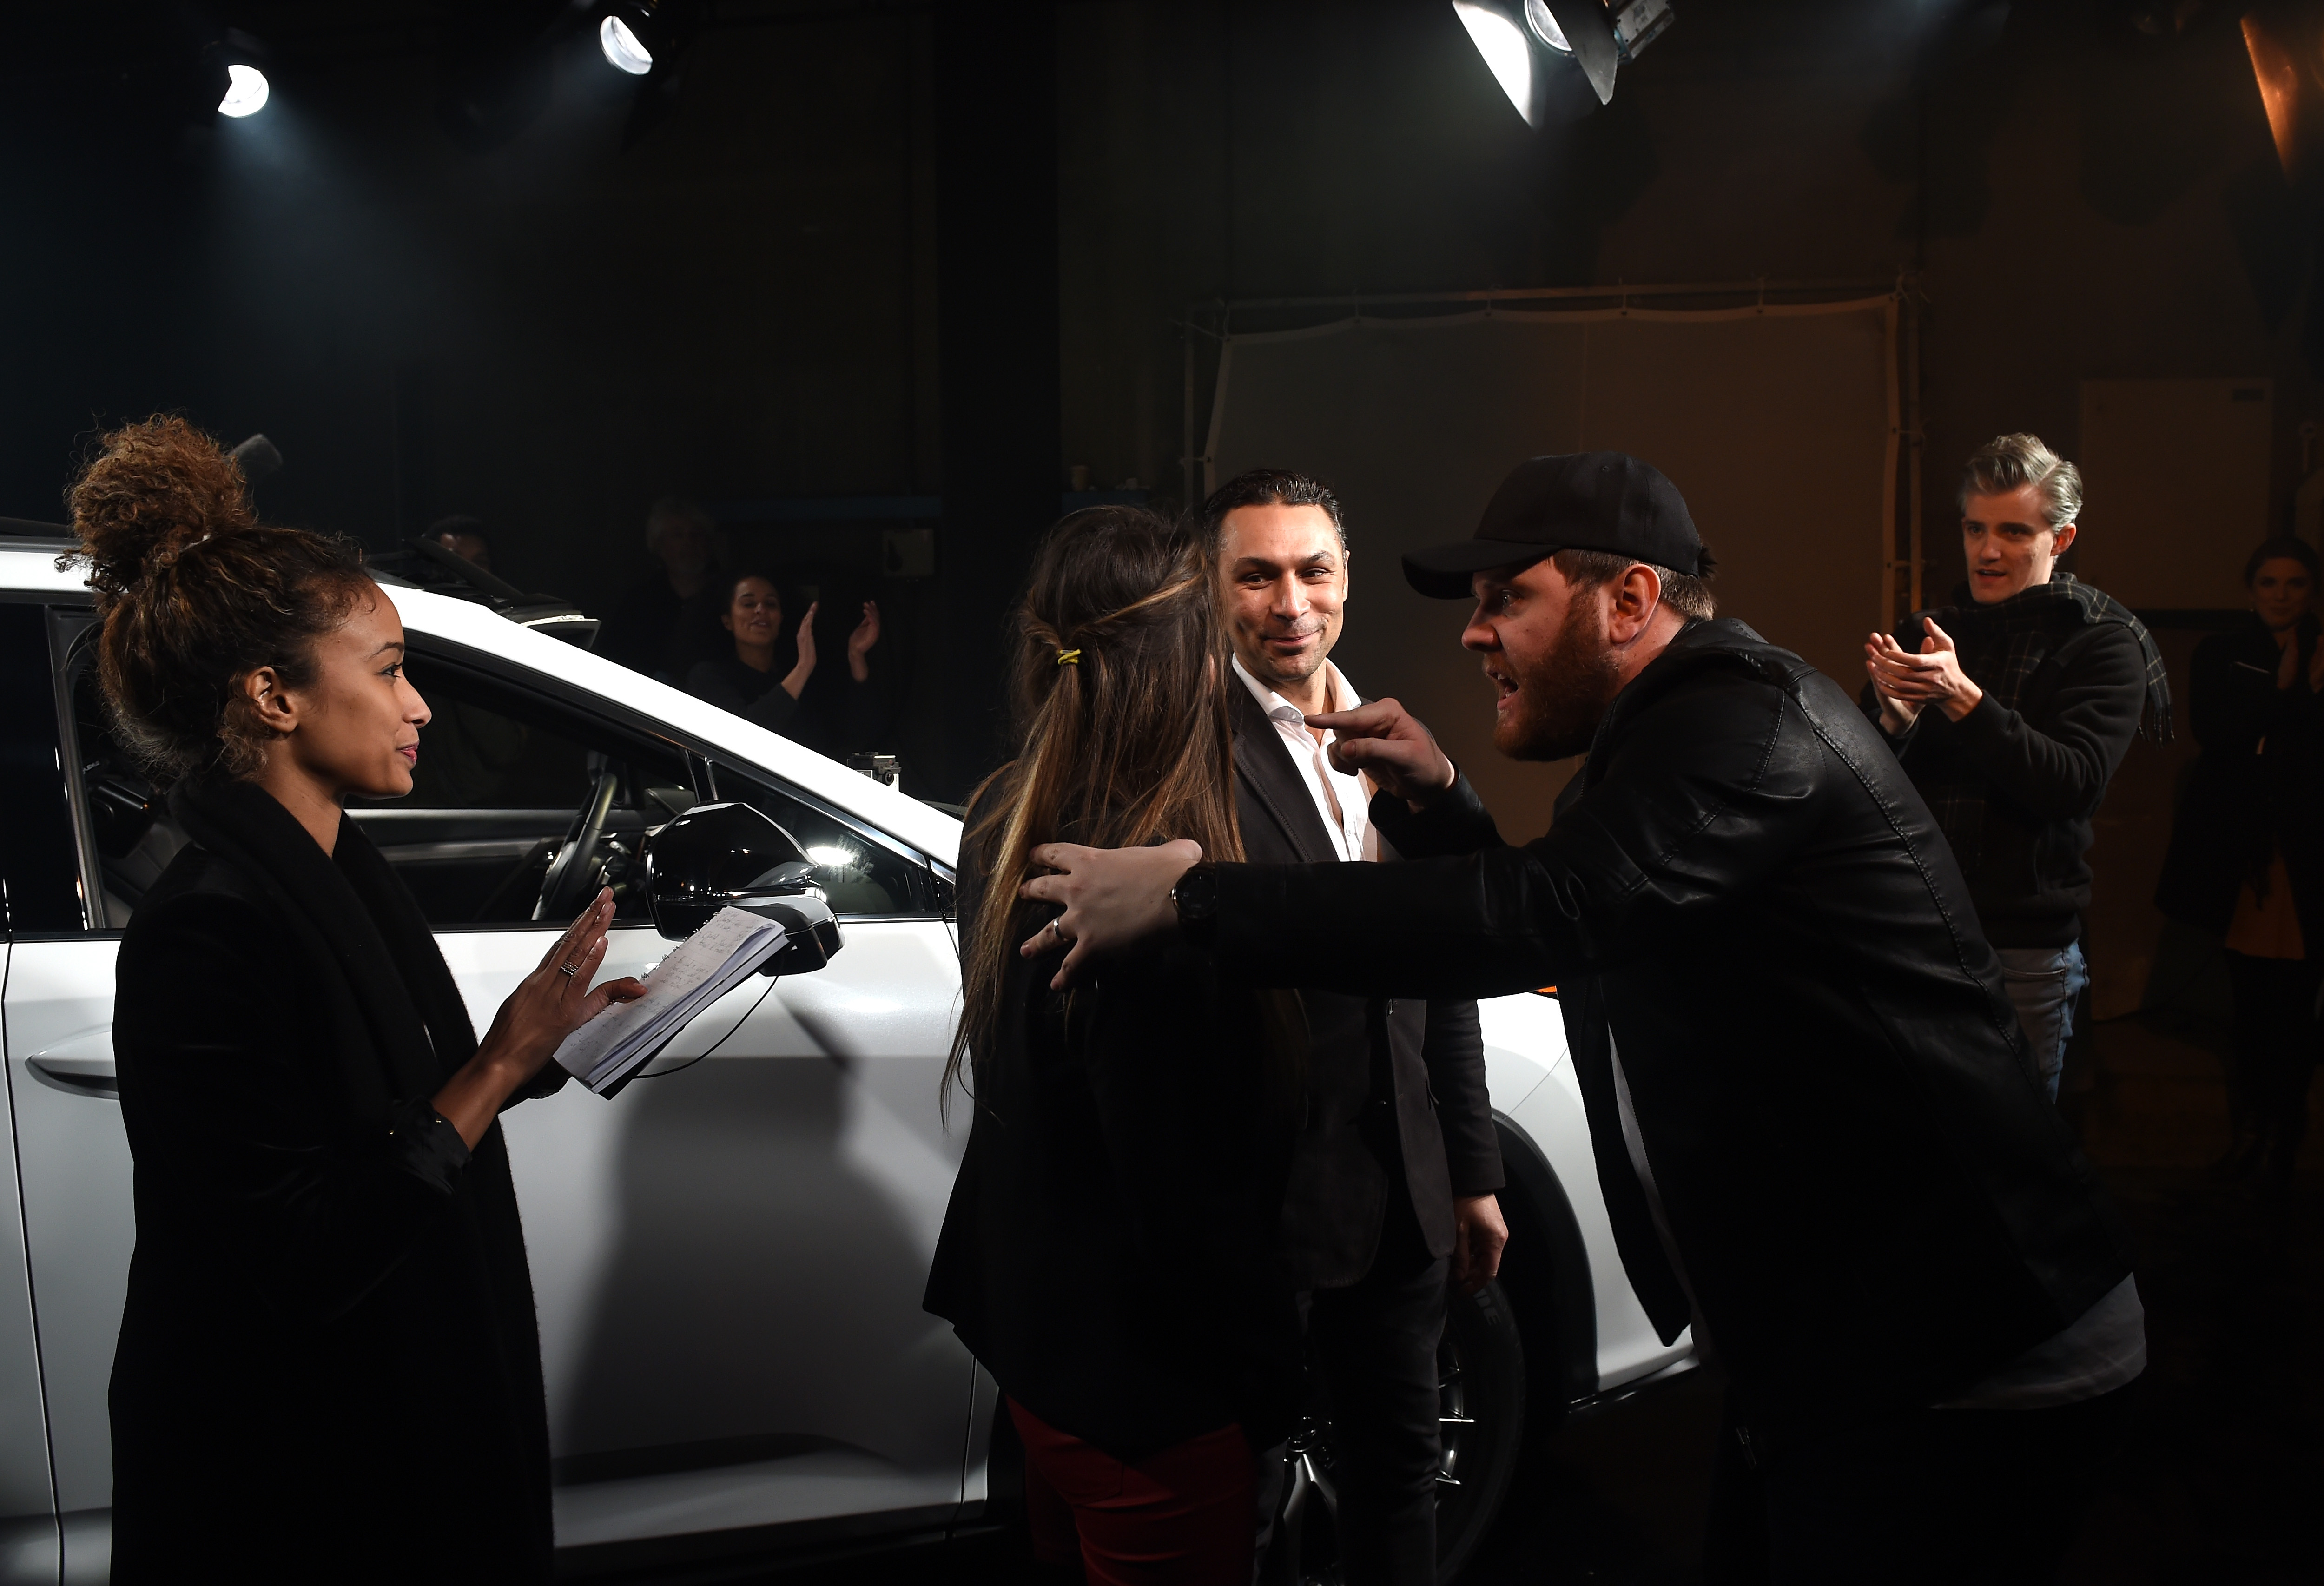 LONDON, ENGLAND - FEBRUARY 09: Guests enjoy the new immersive theatre experience, The Life RX, a performance celebrating the launch of the boldly designed new Lexus RX on February 9, 2016 in London, England. (Photo by Stuart C. Wilson/Getty Images for Lexus)